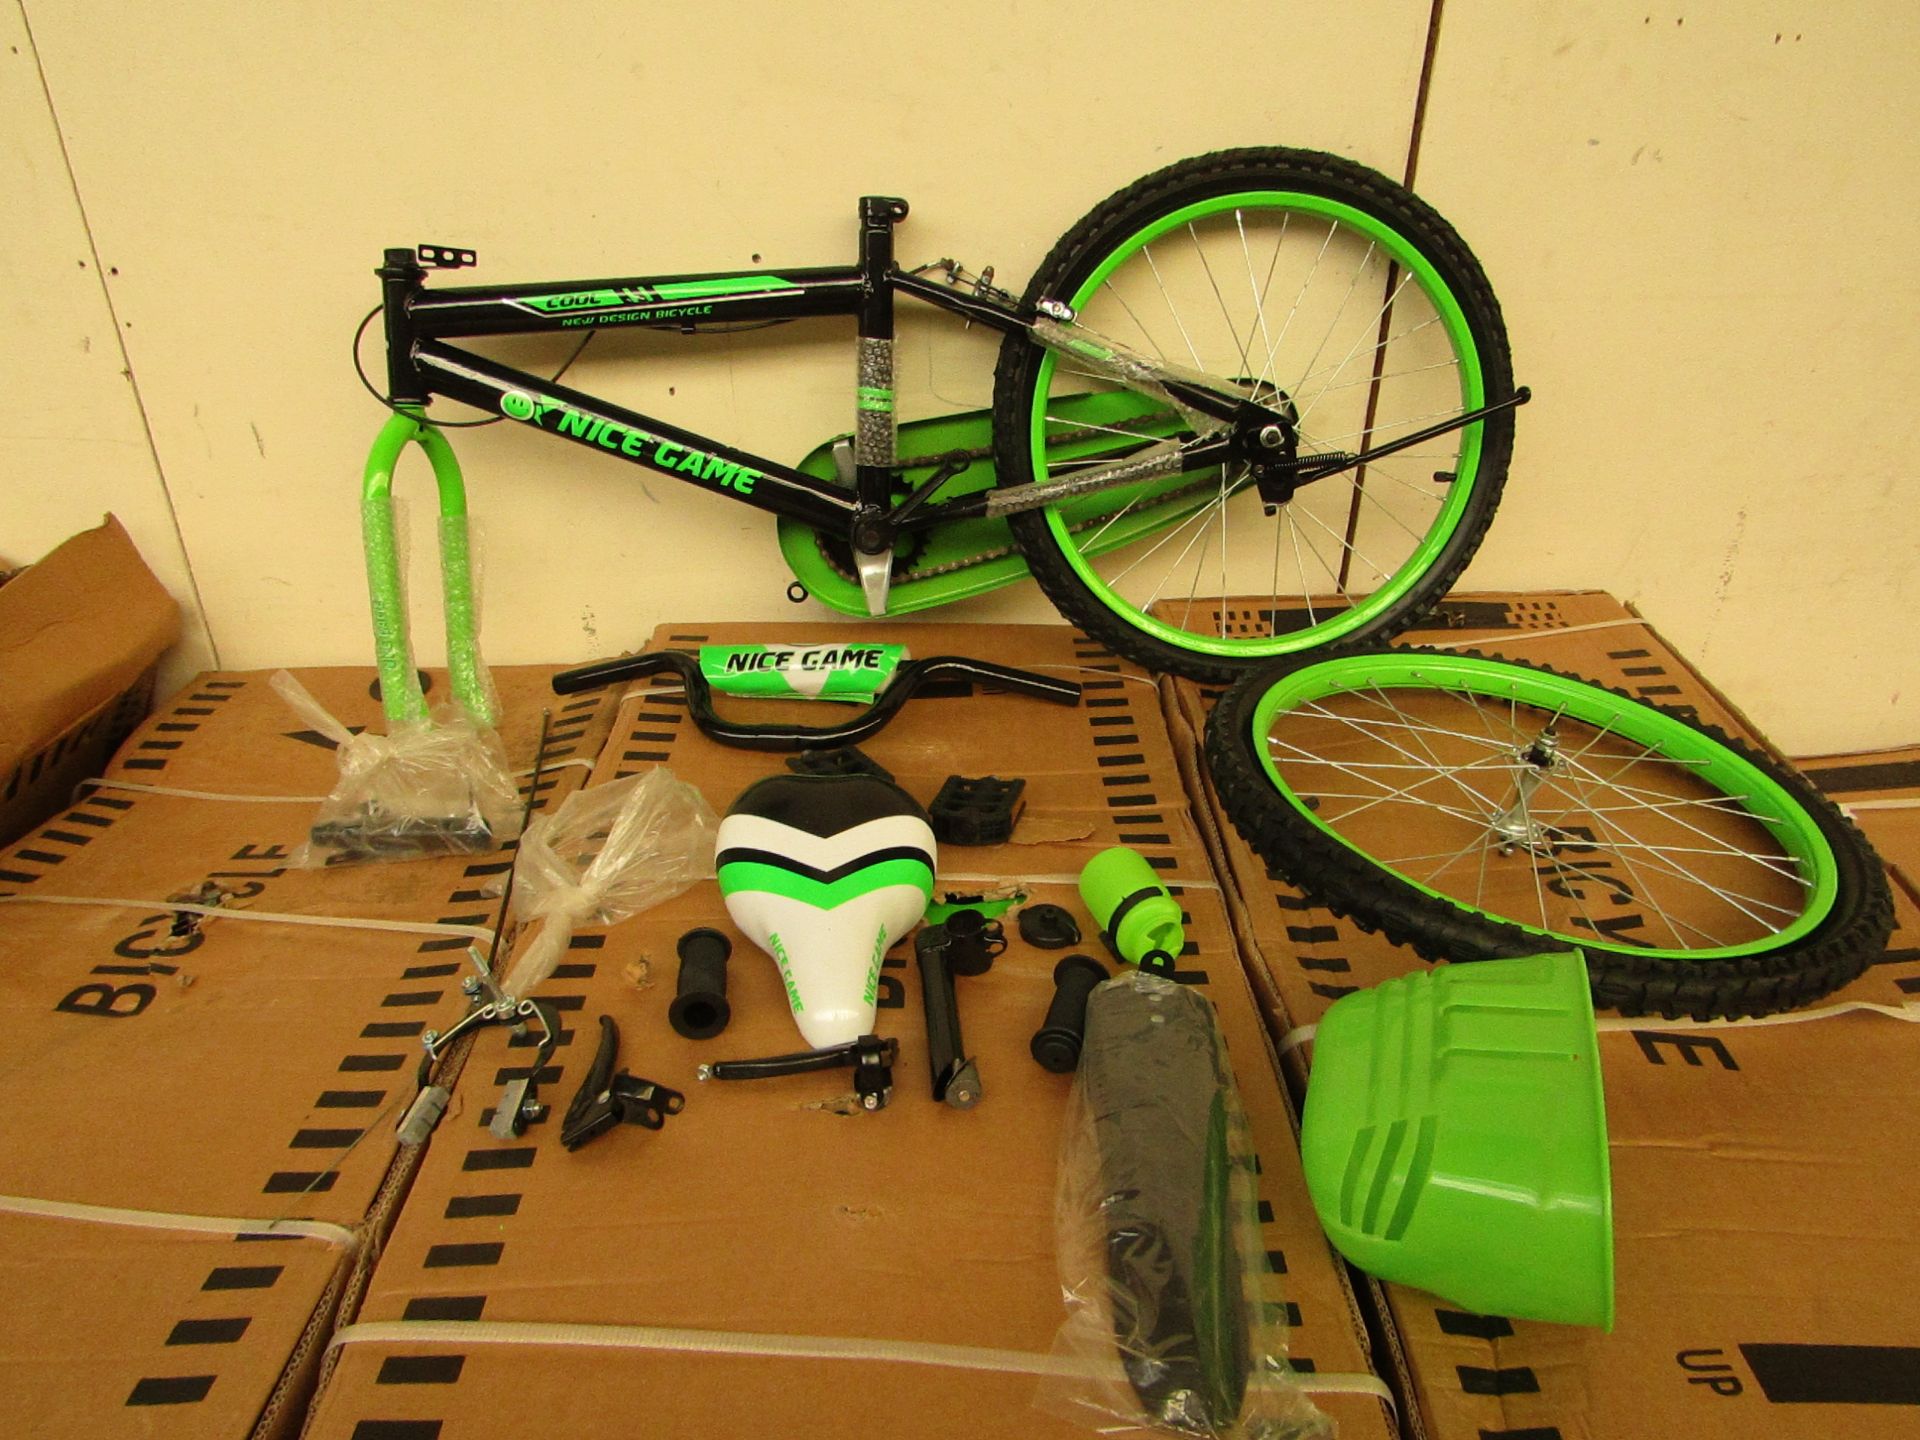 Nice game Green colour bicycle, 20" frame, new and boxed.